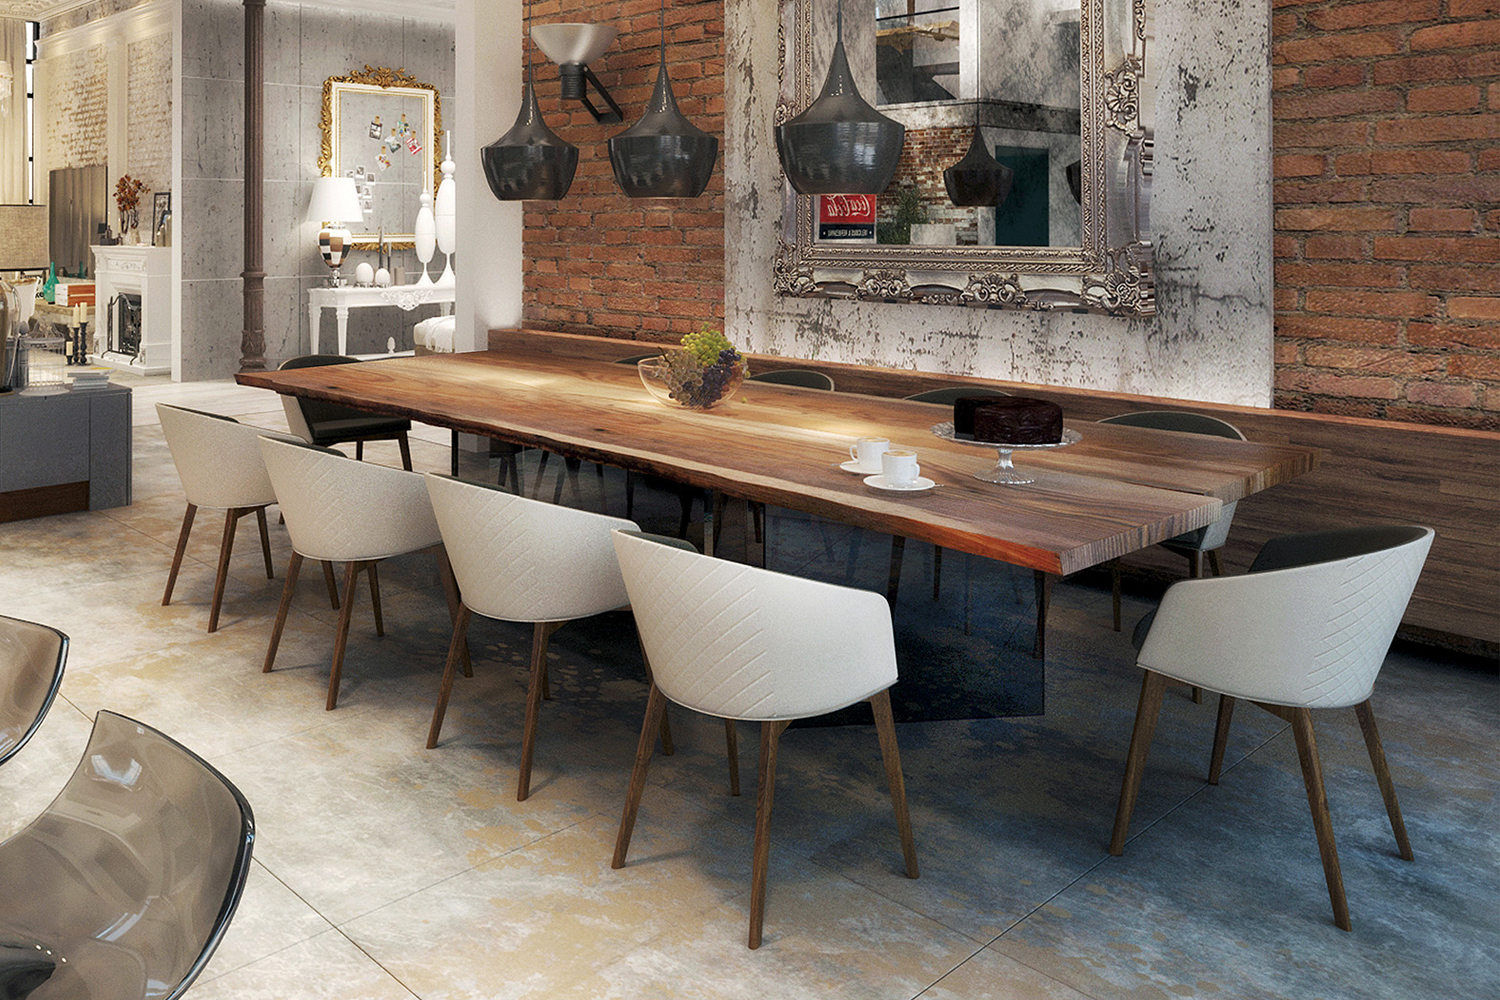 Luxury Dining Room Sets, Contemporary Dining Room Chairs Uk